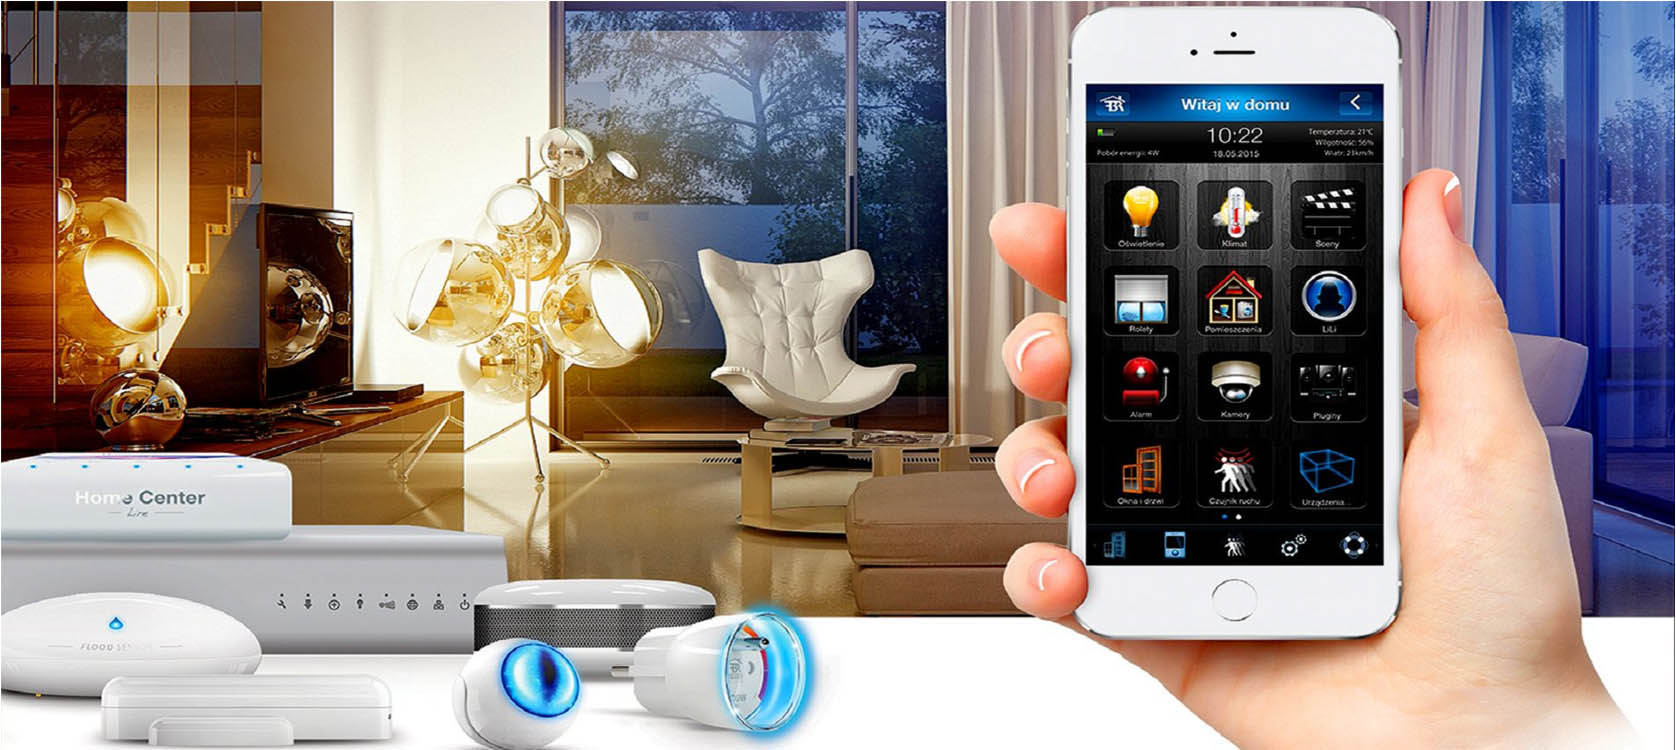 Get Connected With Smart home Home Security and Home Automation Products!